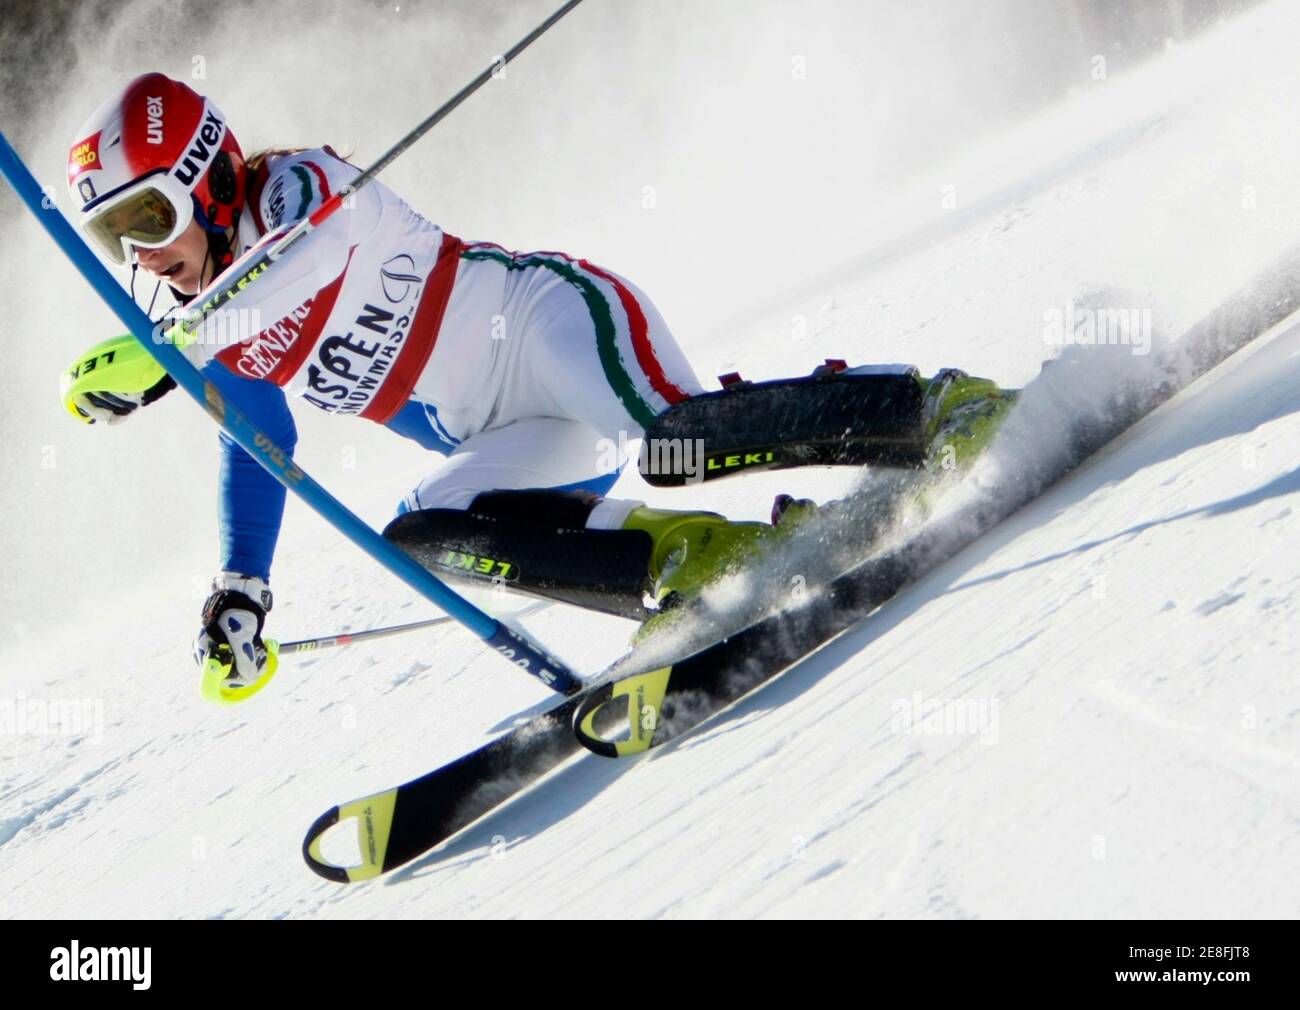 Nicole Gius of Italy skis to the sixth best time in the first heat of the women's World Cup Slalom ski race in Aspen, Colorado November29, 2009.  REUTERS/Rick Wilking (UNITED STATES SPORT SKIING) Stock Photo